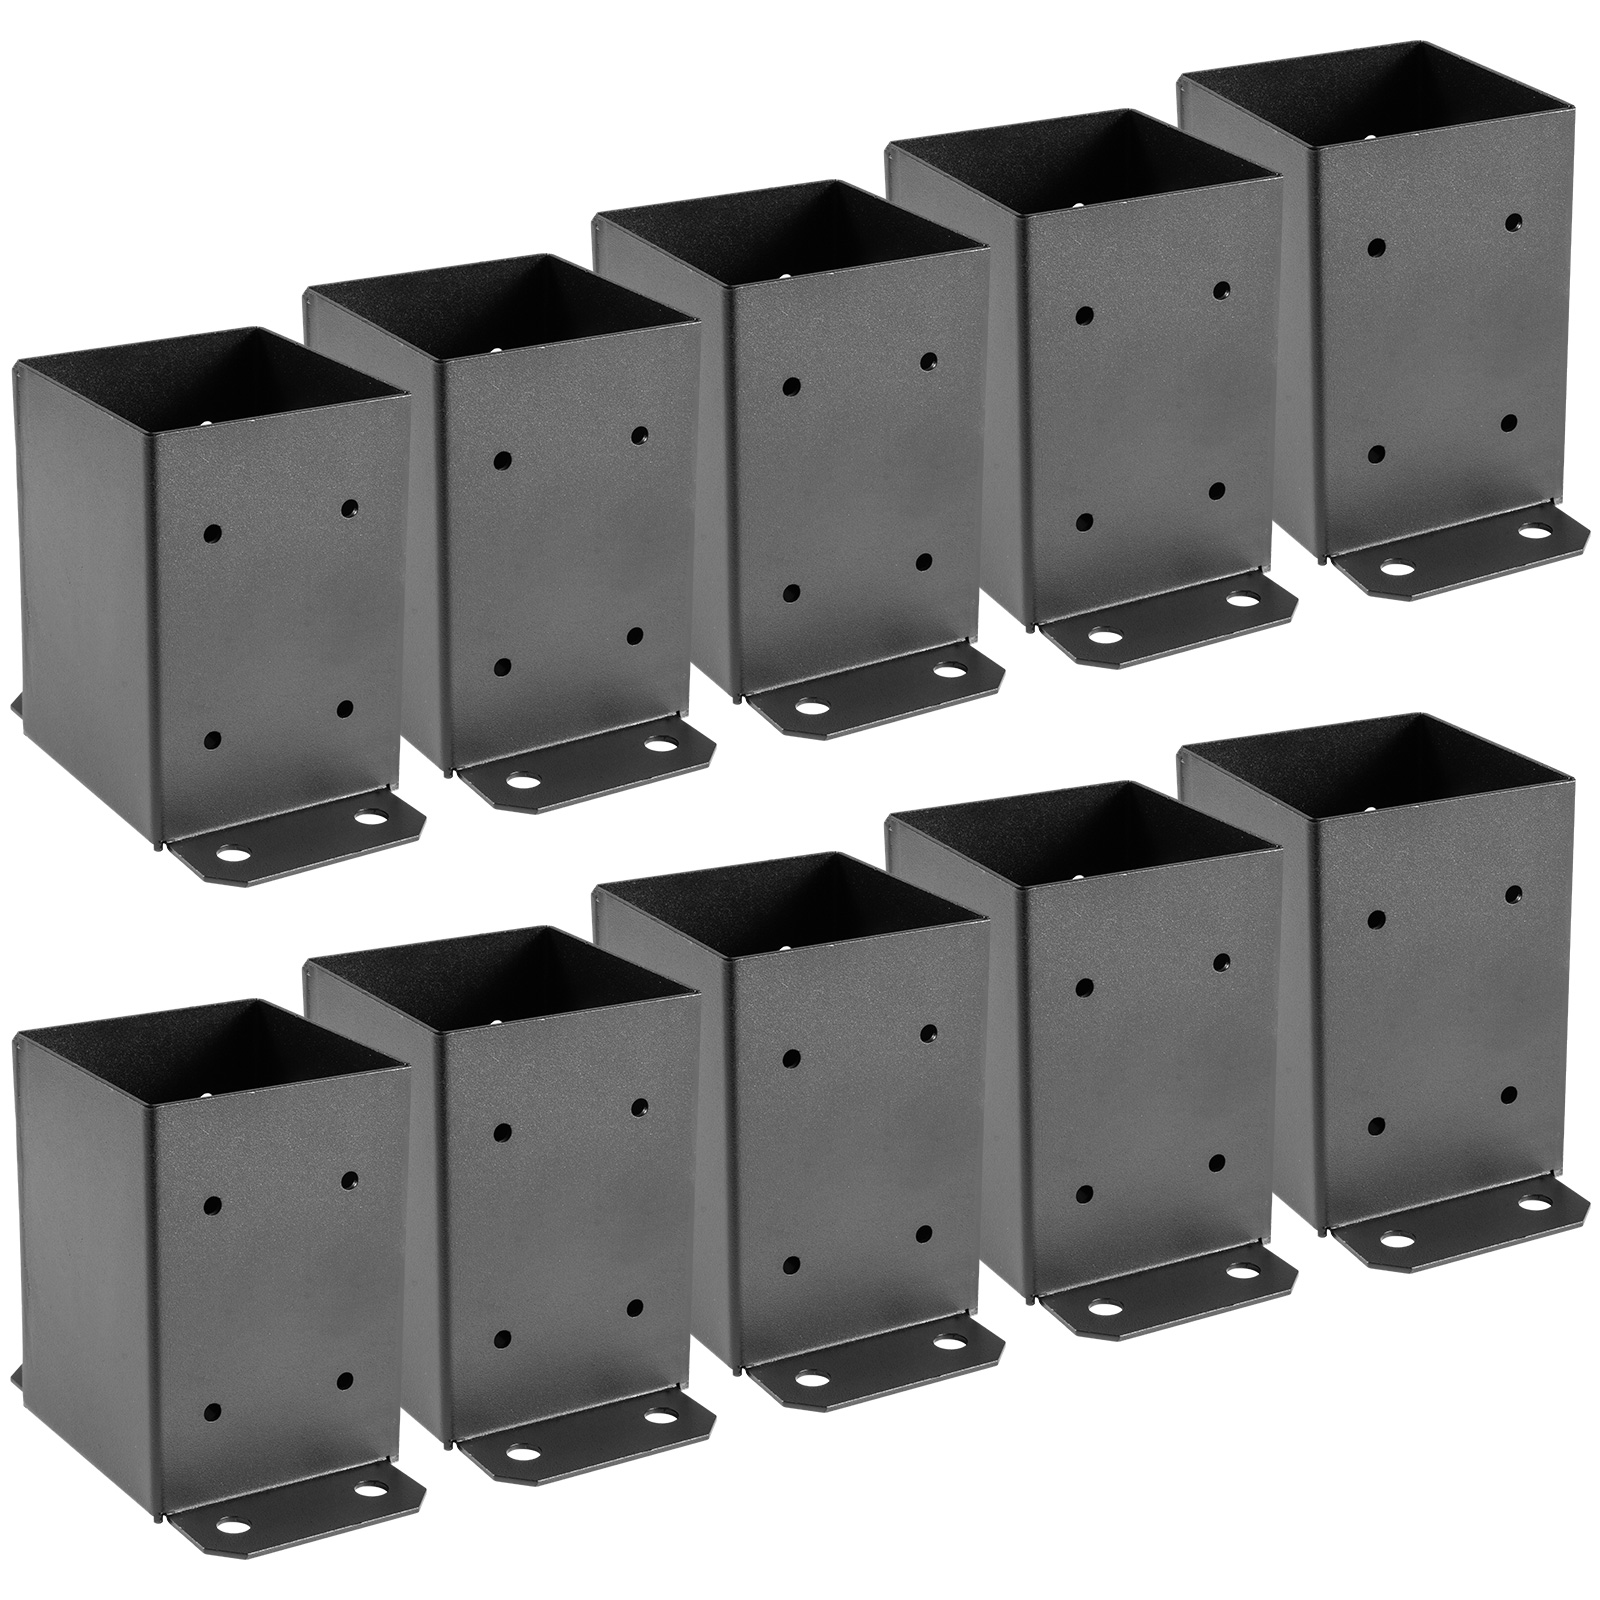 Vevor 4 X 4 Post Base Post Anchor 10pcs Black Steel With Bolts + Screws + Wrench от Vevor Many GEOs